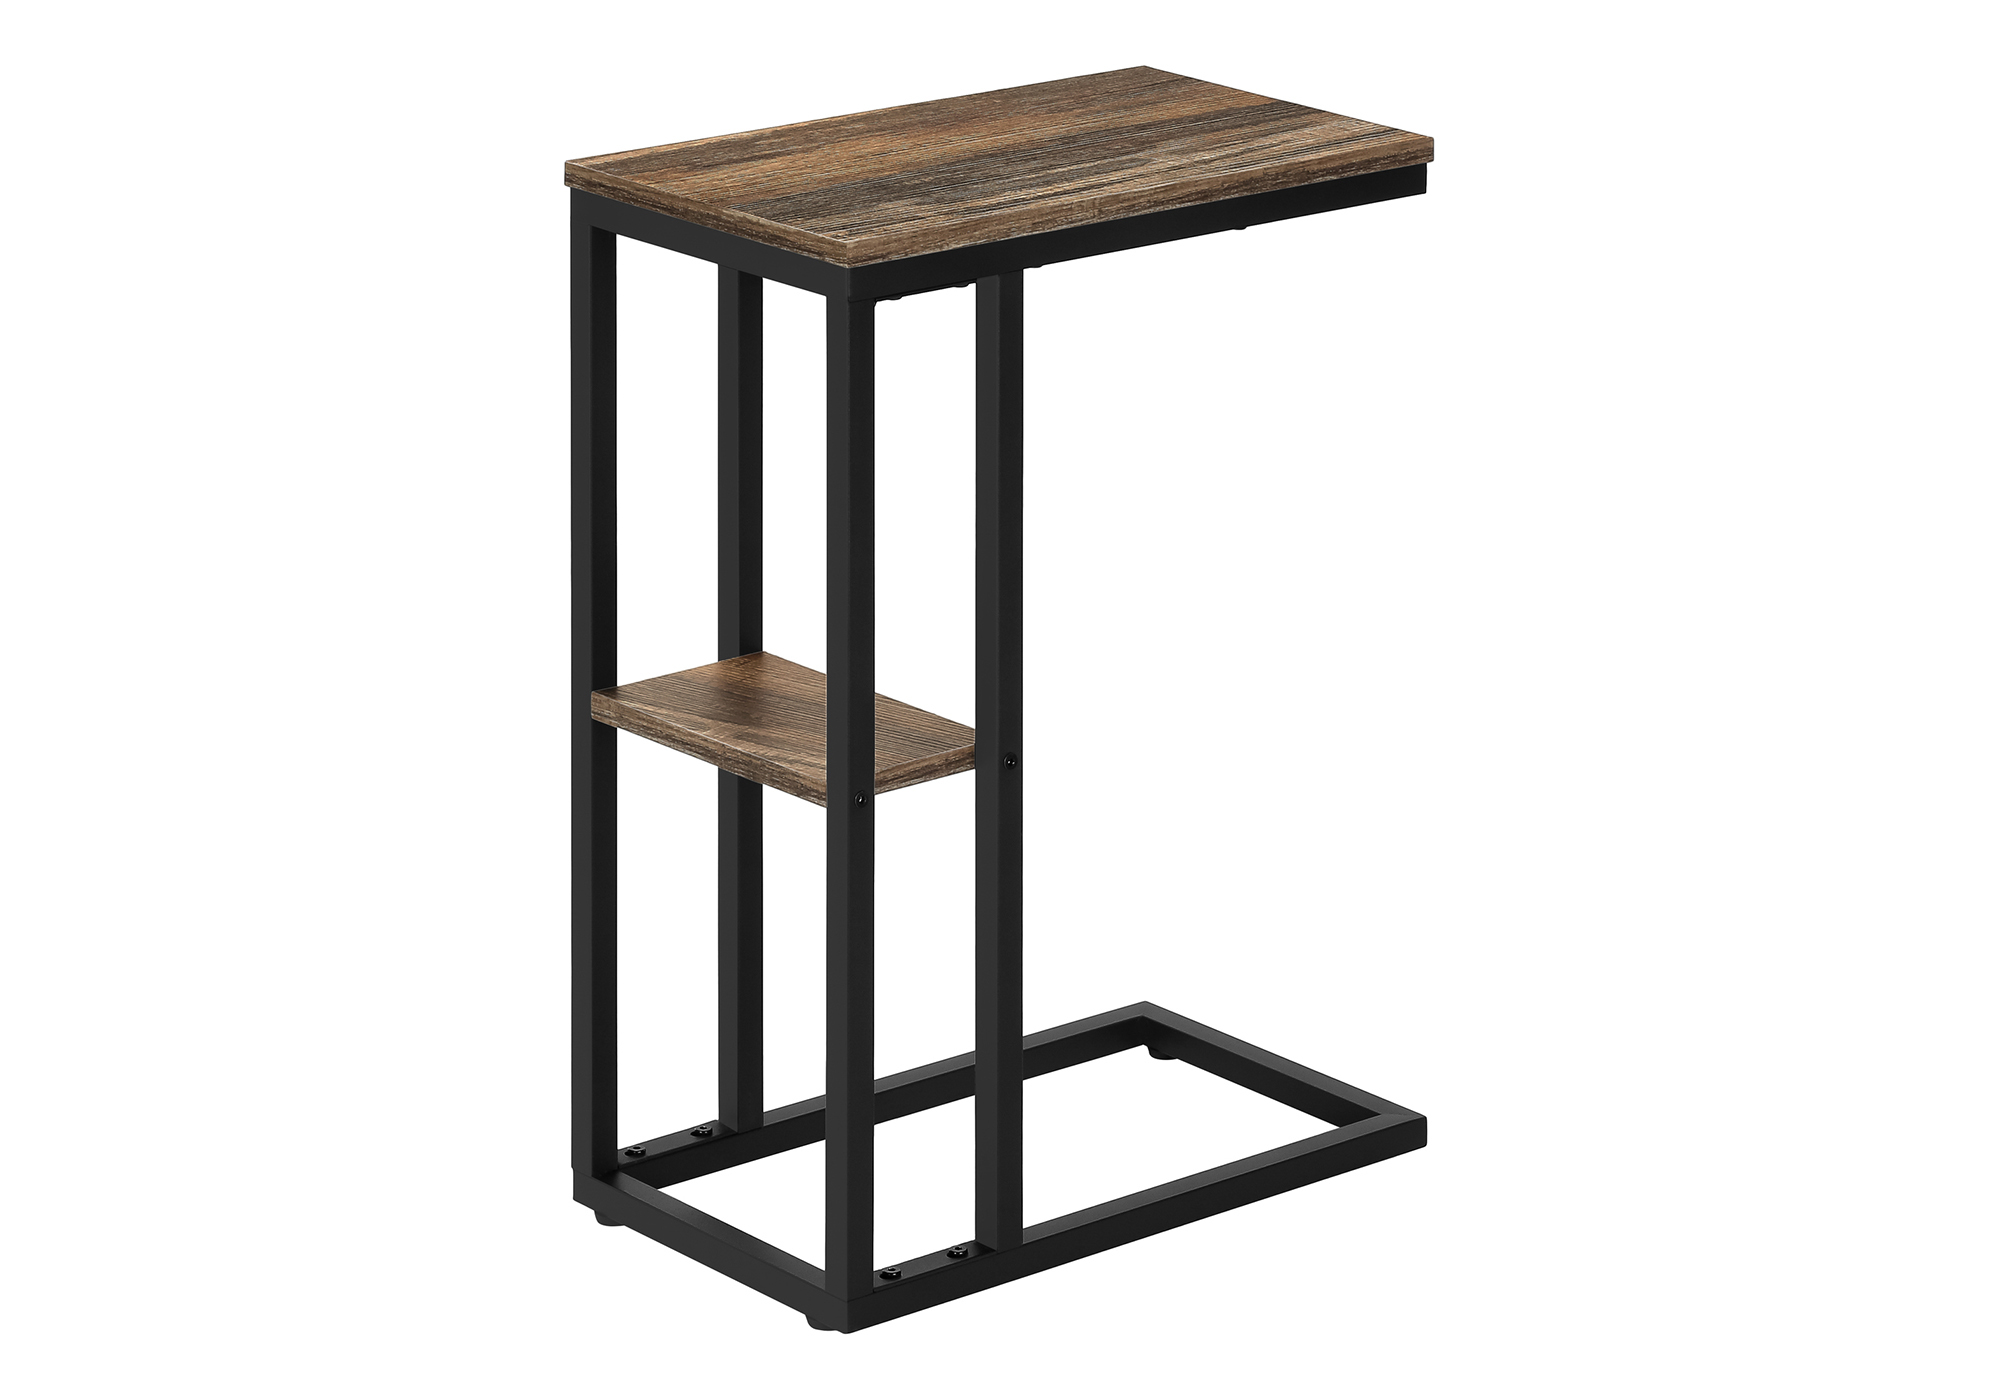 ACCENT TABLE - 25"H / BROWN RECLAIMED-LOOK / BLACK METAL